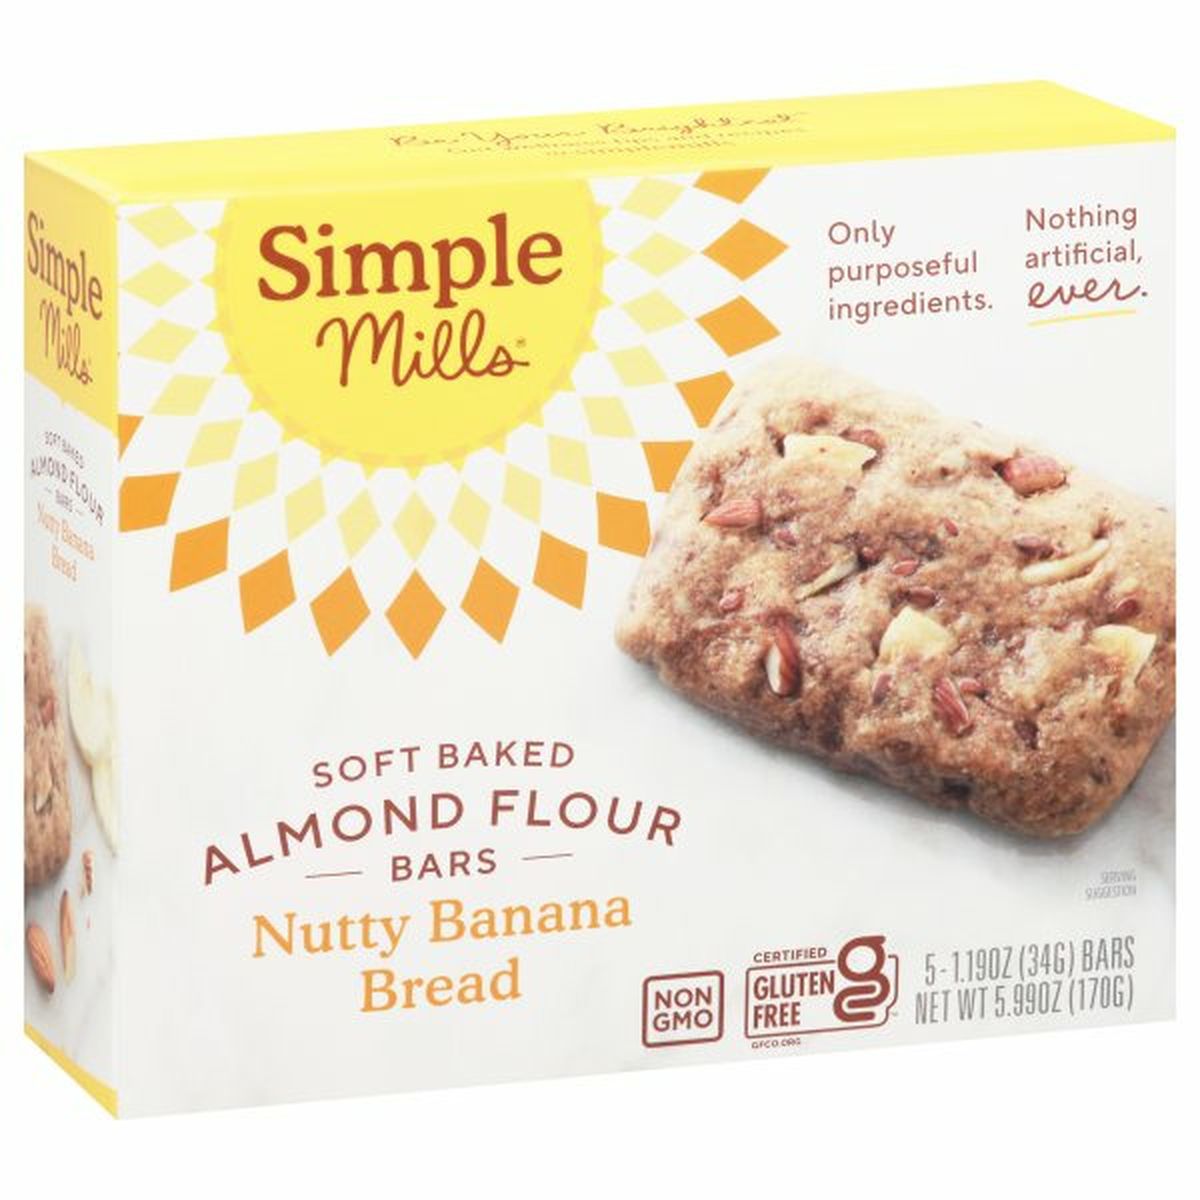 Calories in Simple Mills Almond Flour Bars, Nutty Banana Bread, Soft Baked